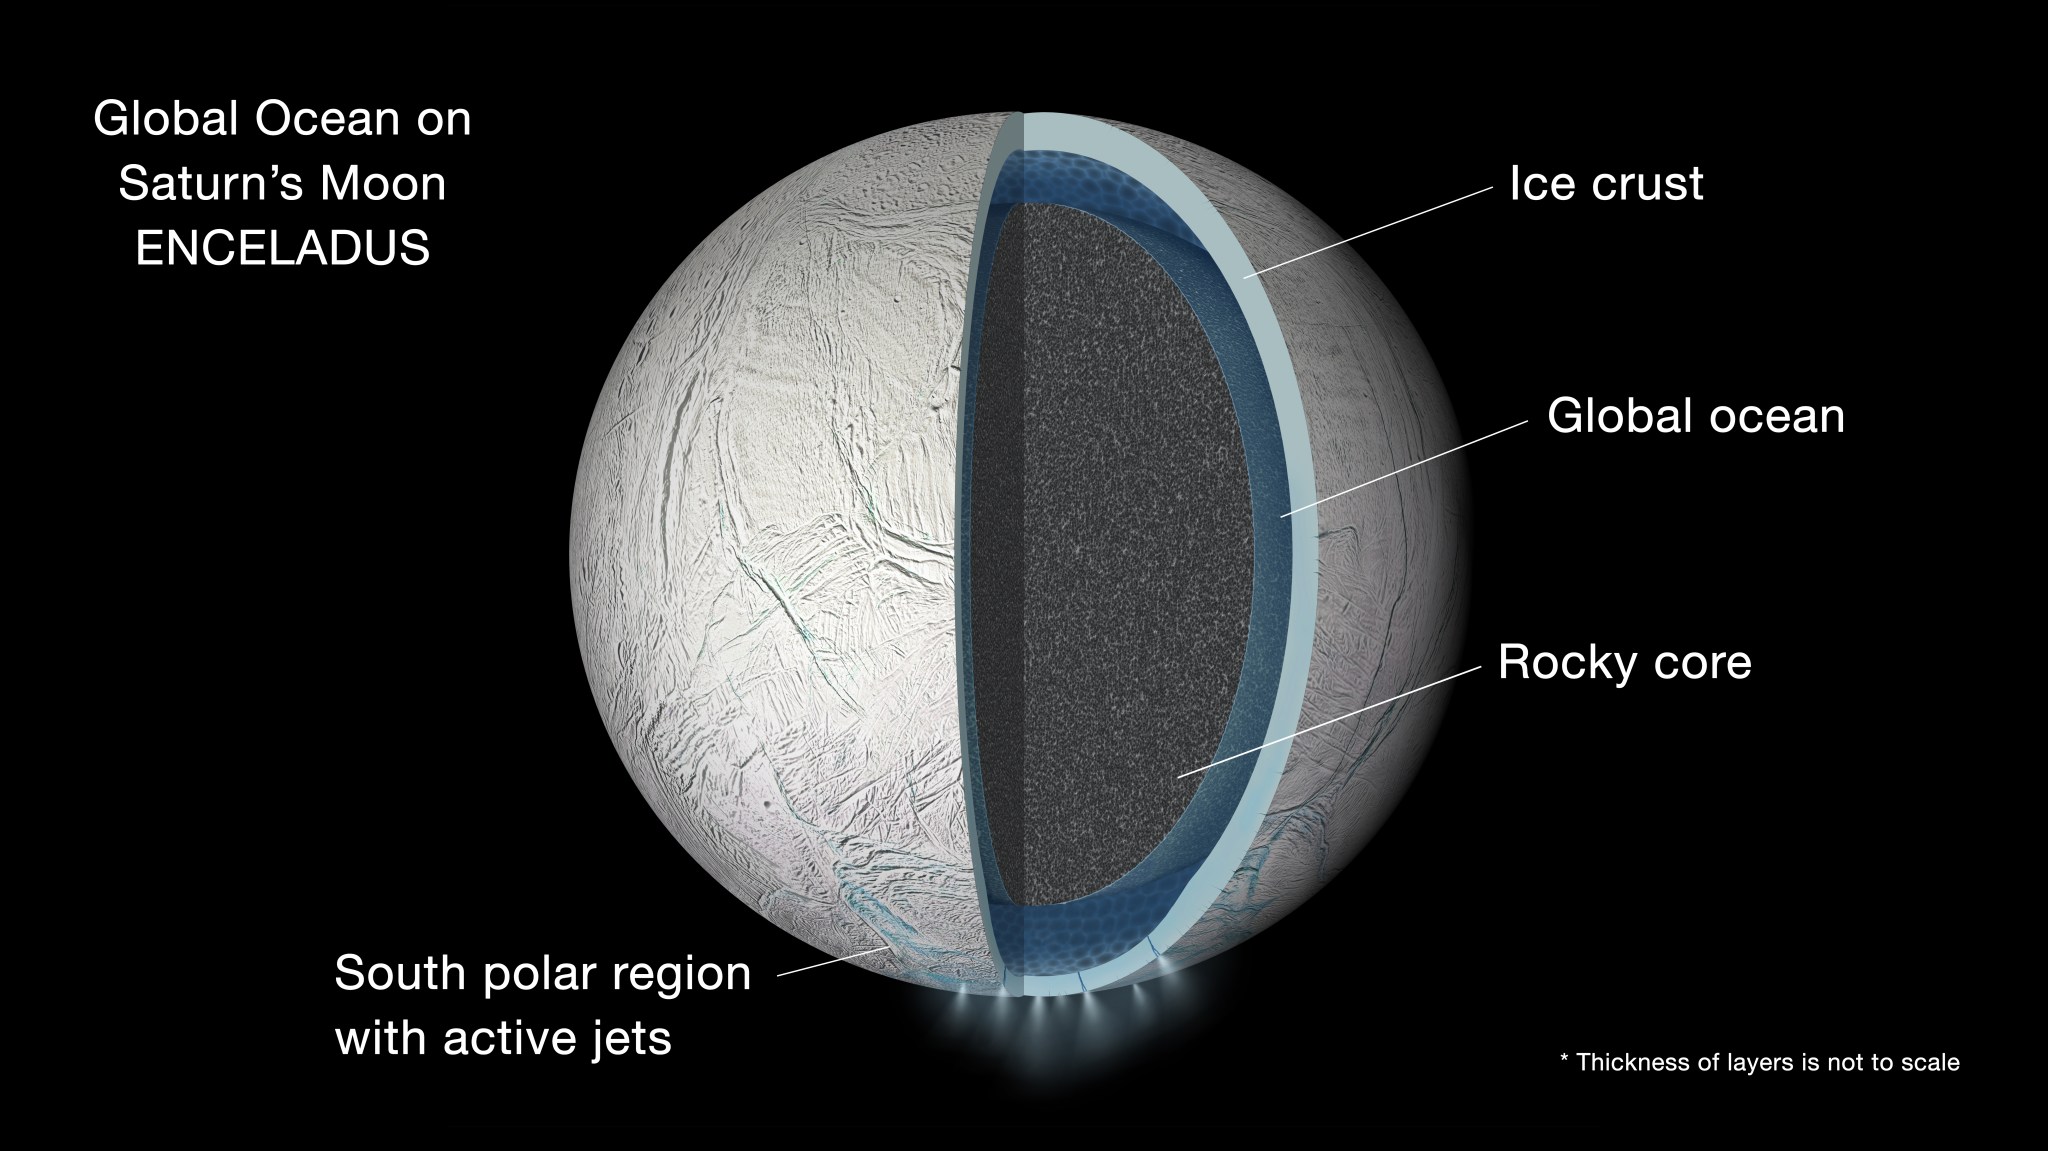 Illustration of the interior of Saturn's moon Enceladus showing a global liquid water ocean between its rocky core and icy crust